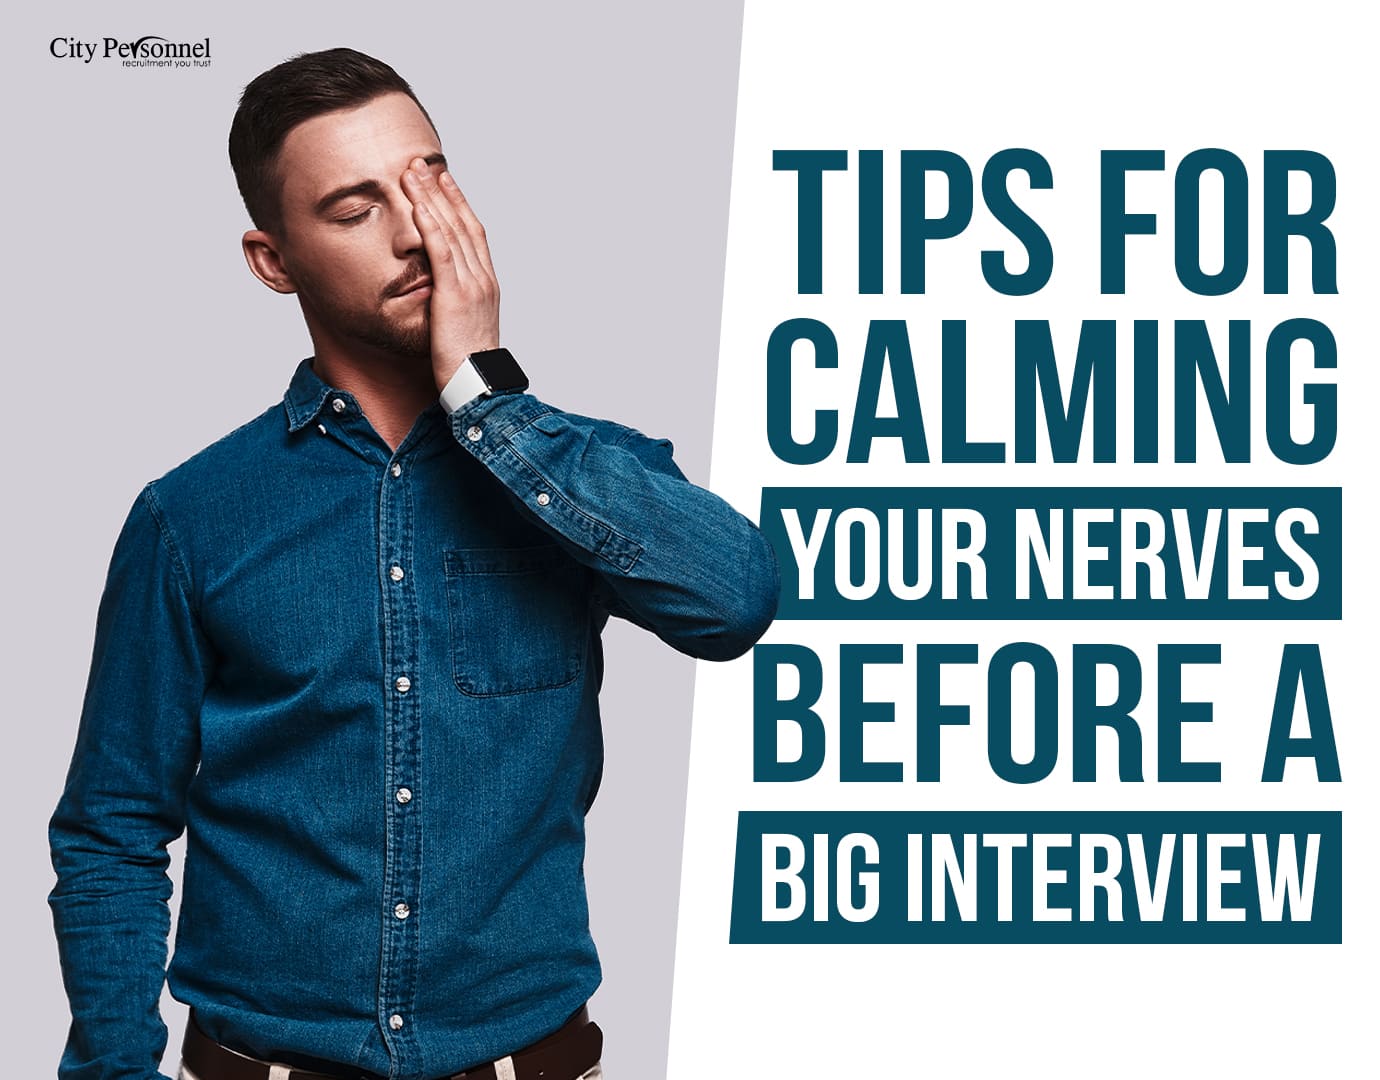 Tips For Calming Your Nerves Before A Big Interview